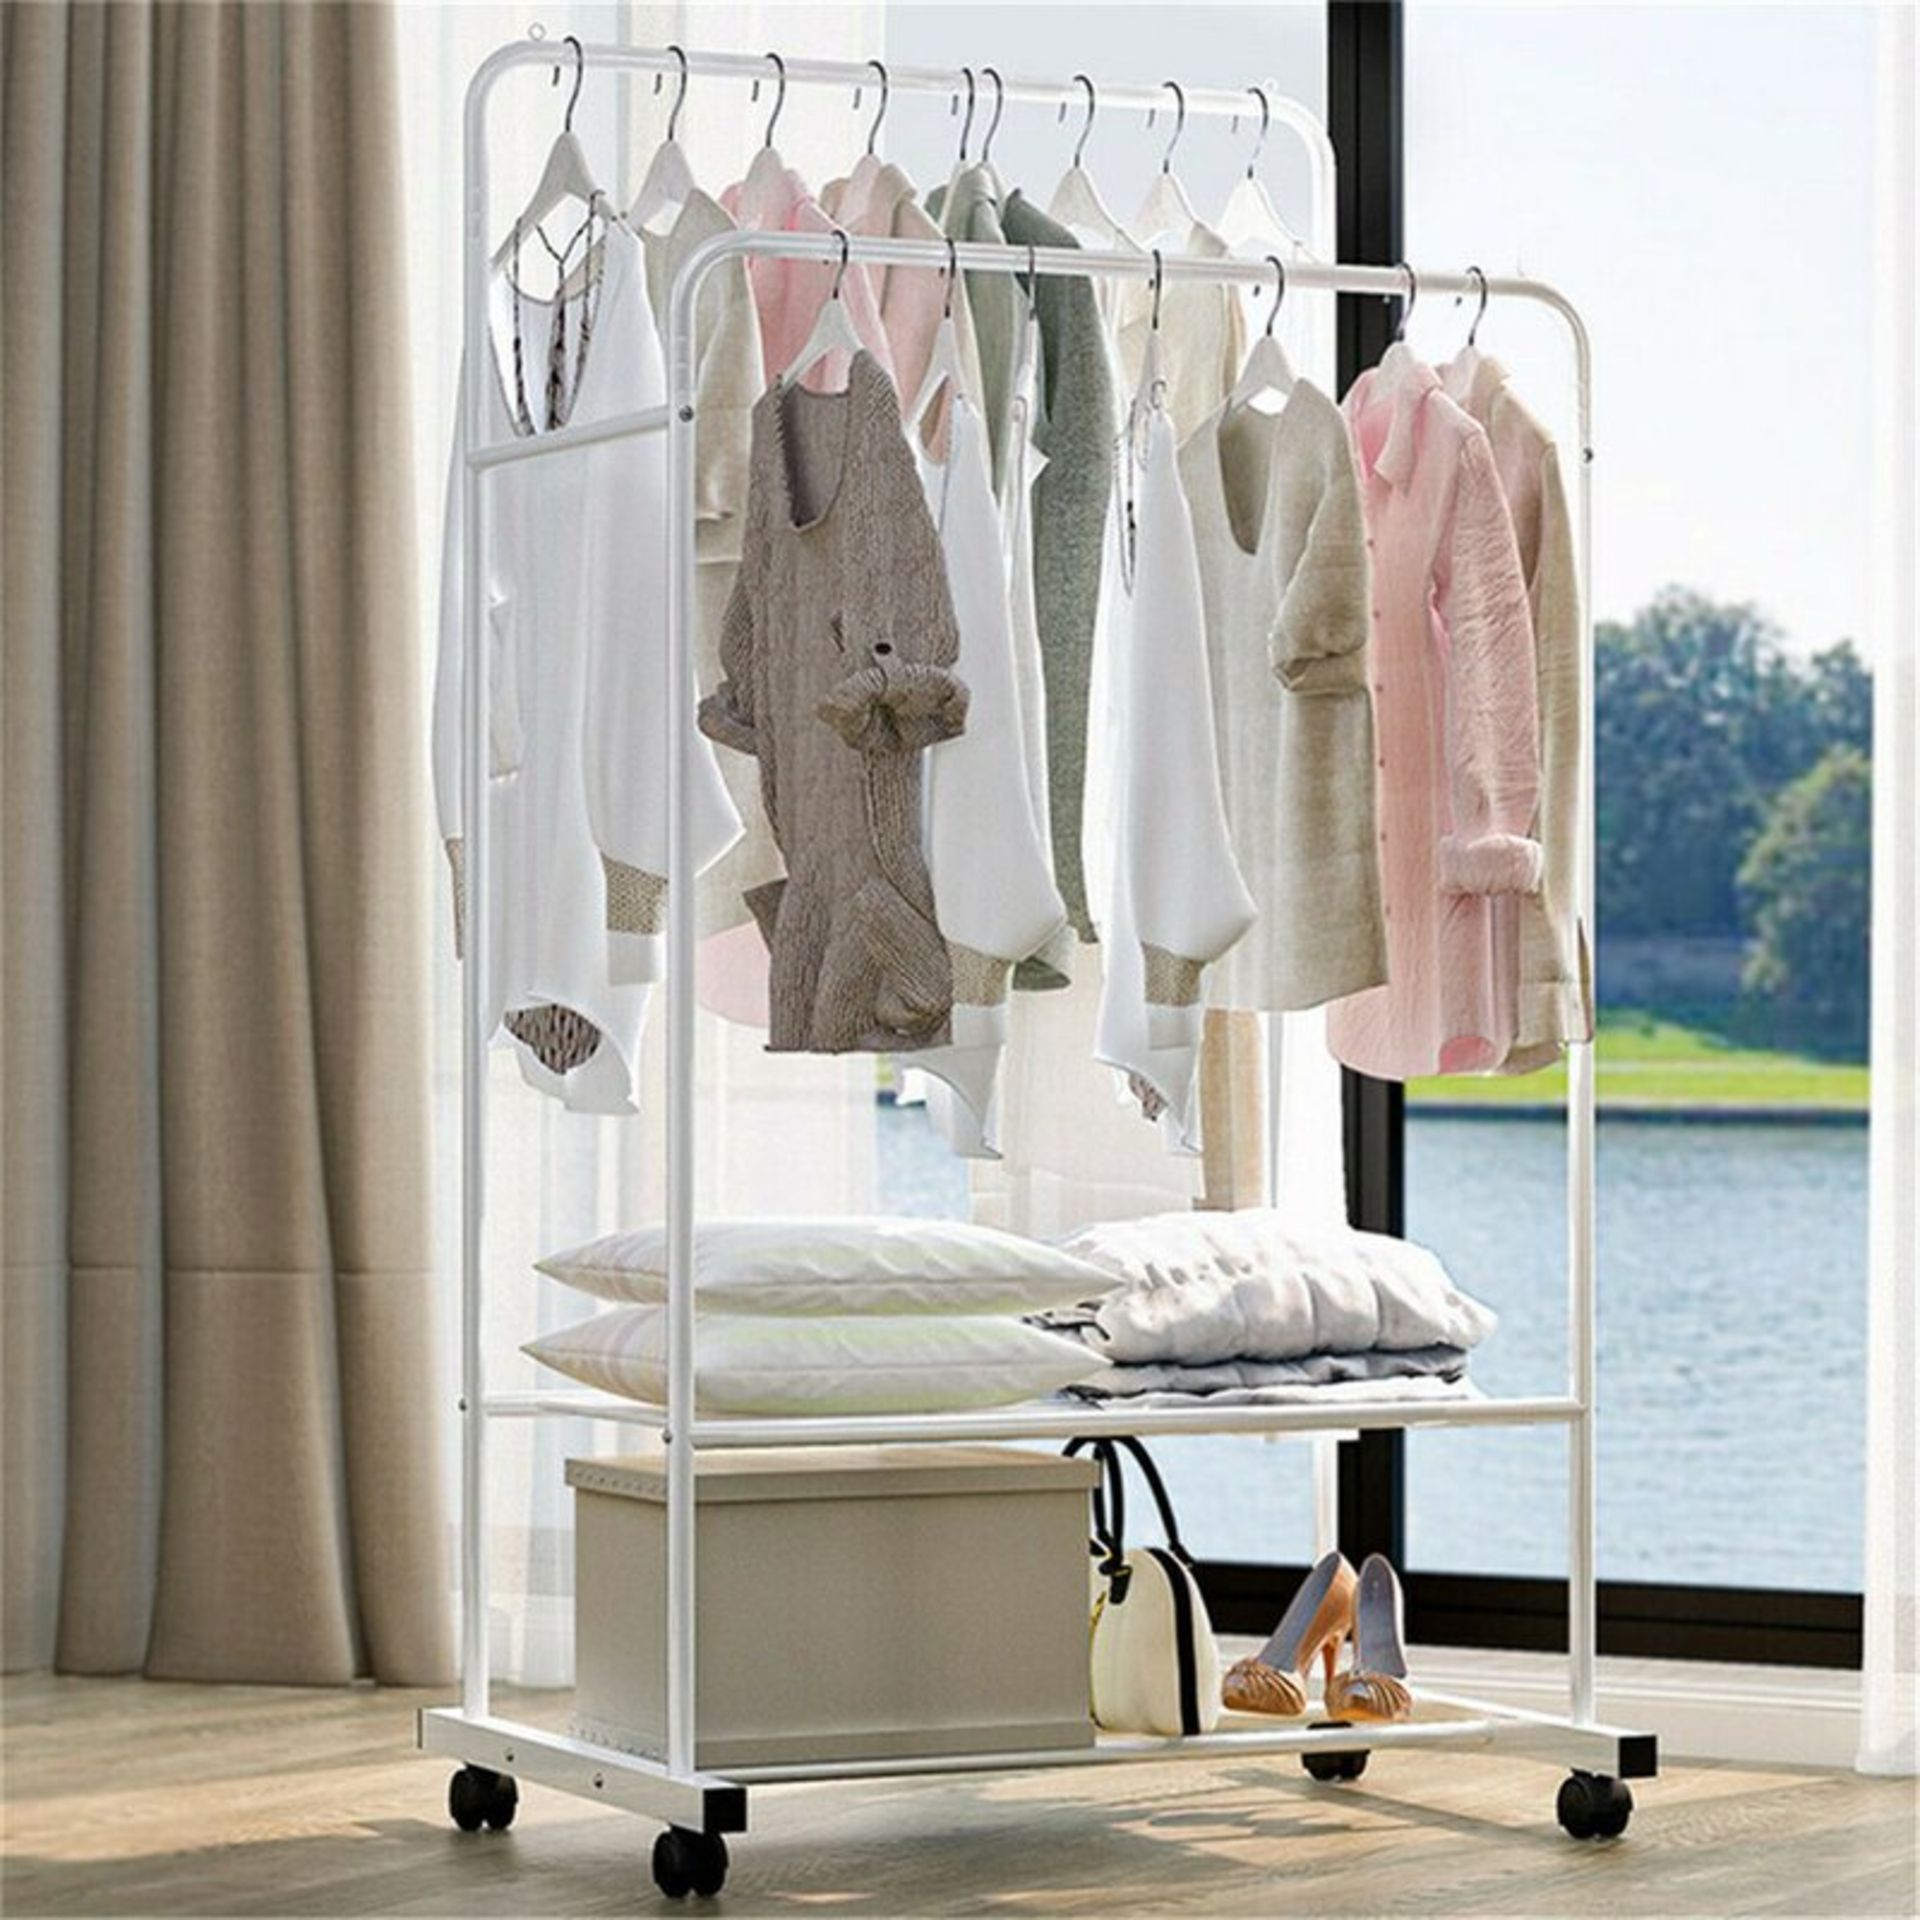 Rolling Clothes Garment Rack Double Rail On Wheels - RRP £54.99. - Image 2 of 4